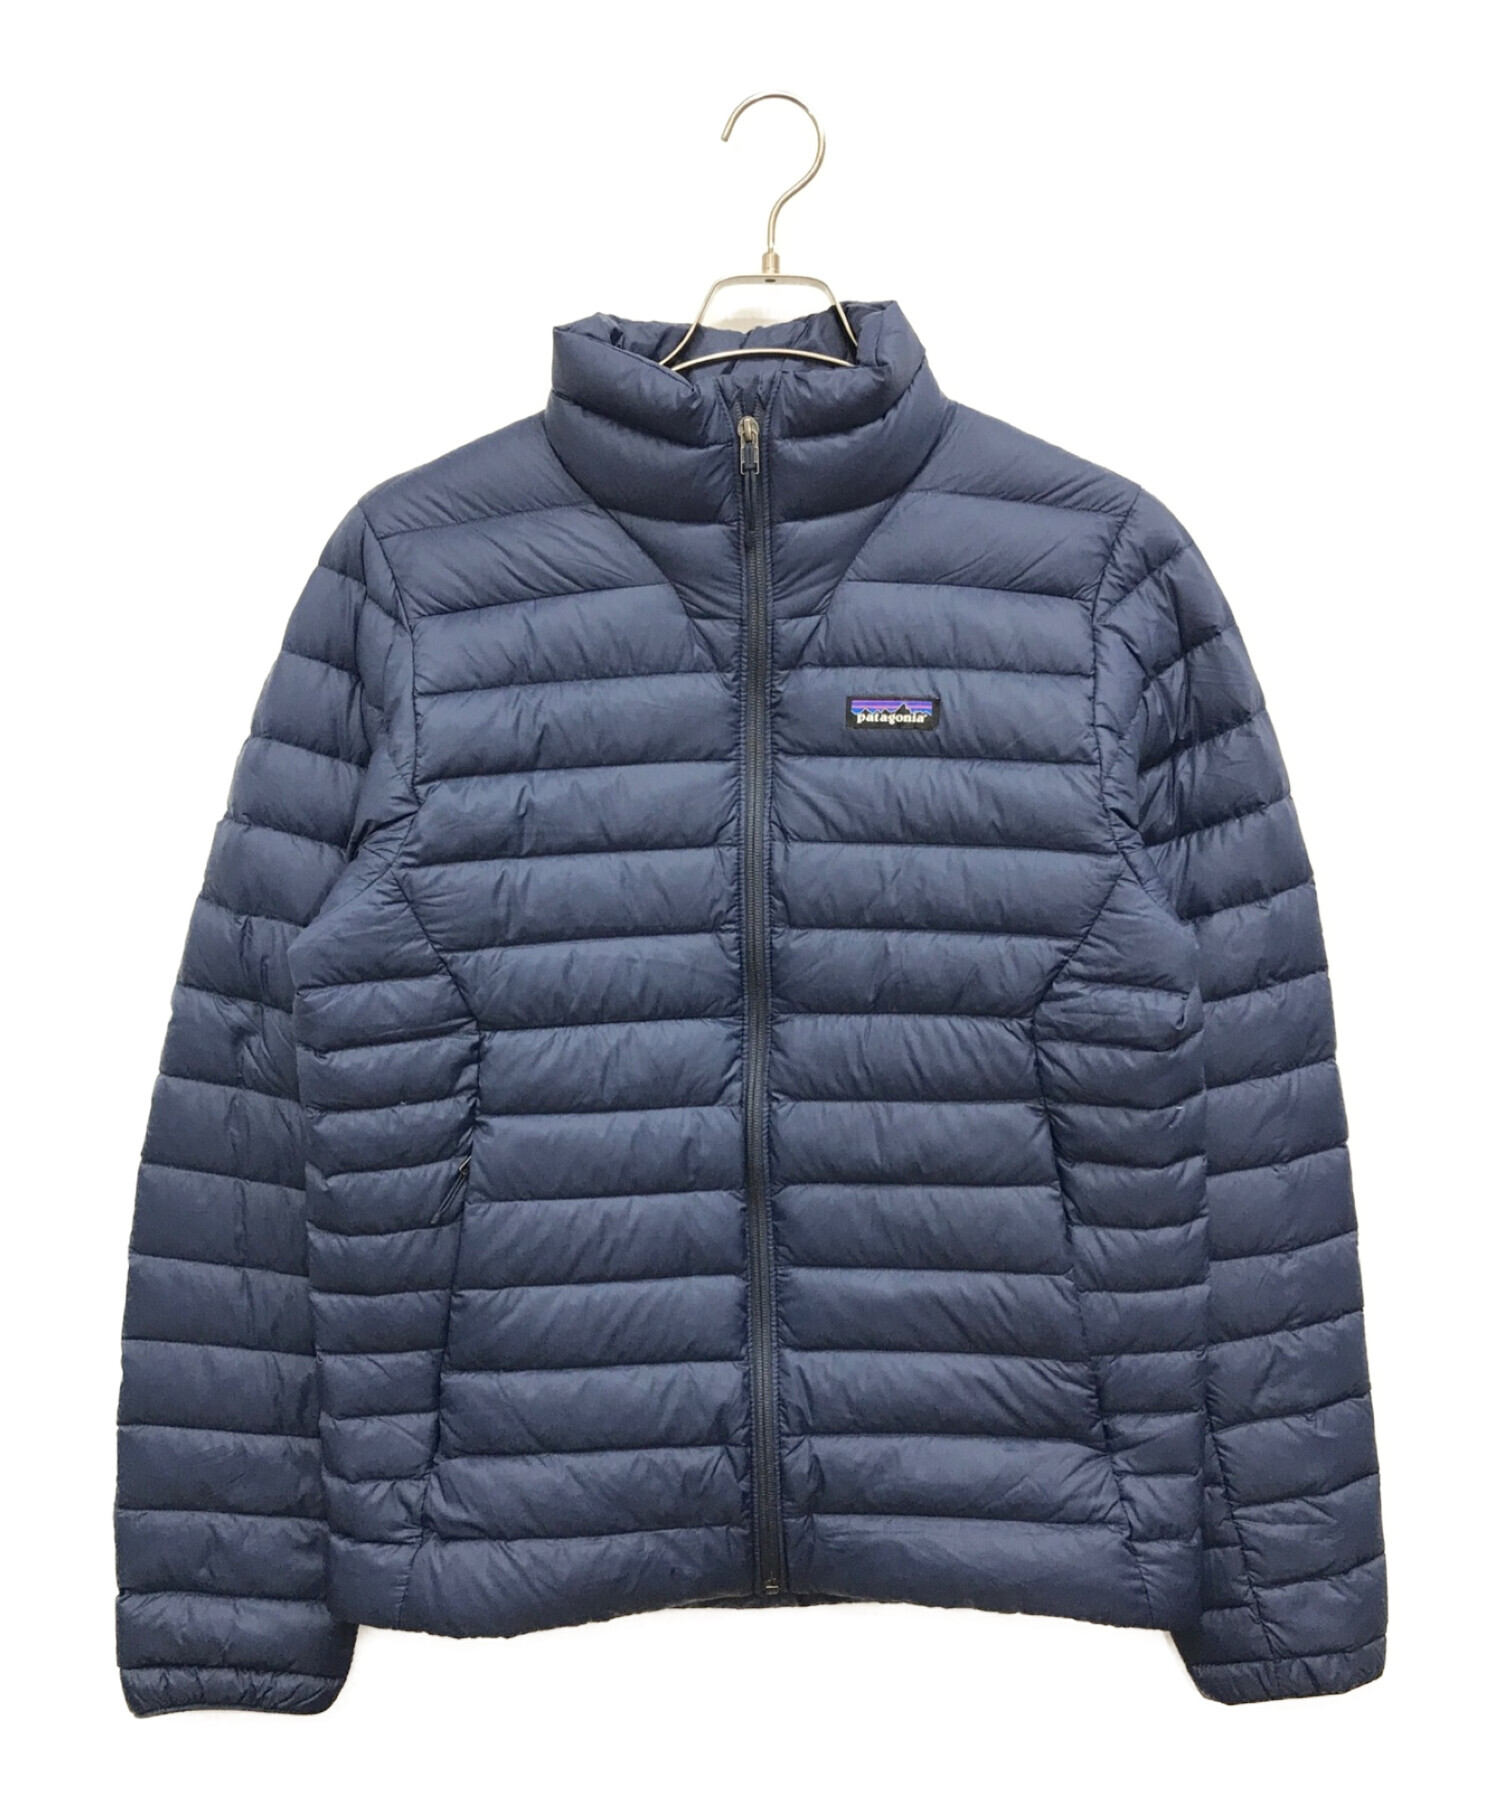 Patagonia ダウンセーター 2011年製 レア size S